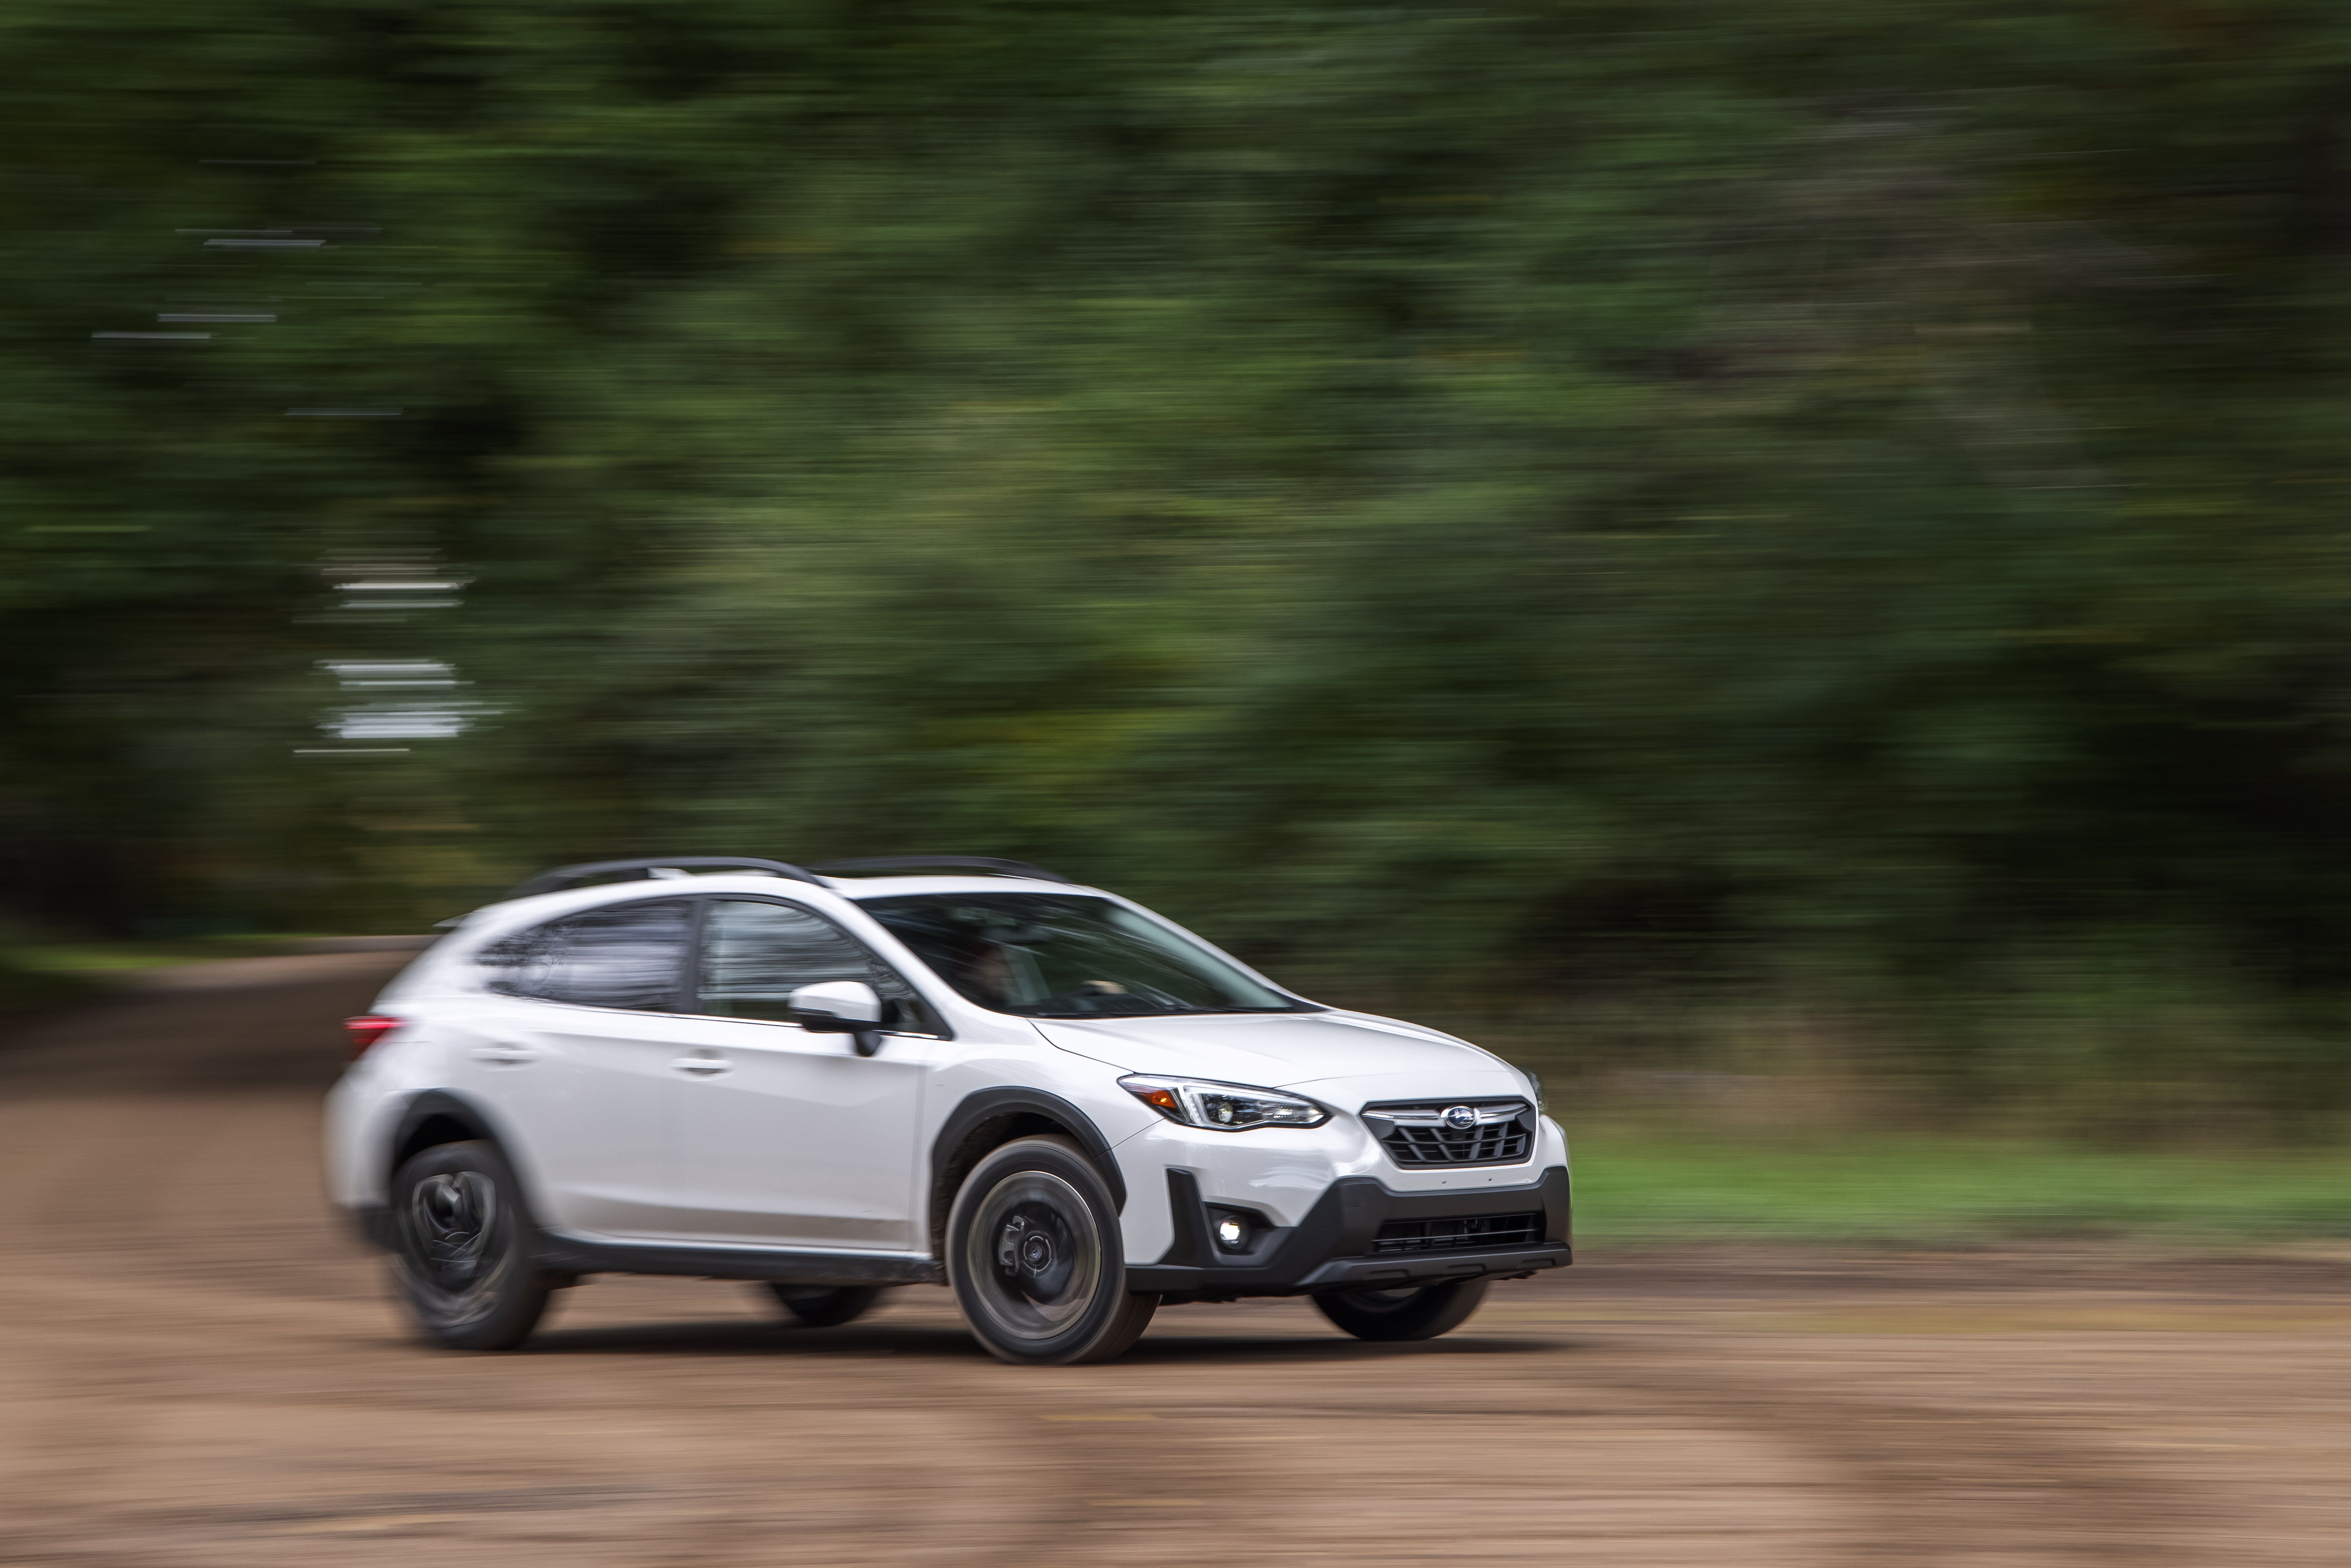 Tested 21 Subaru Crosstrek 2 5l Could Use Even More Power